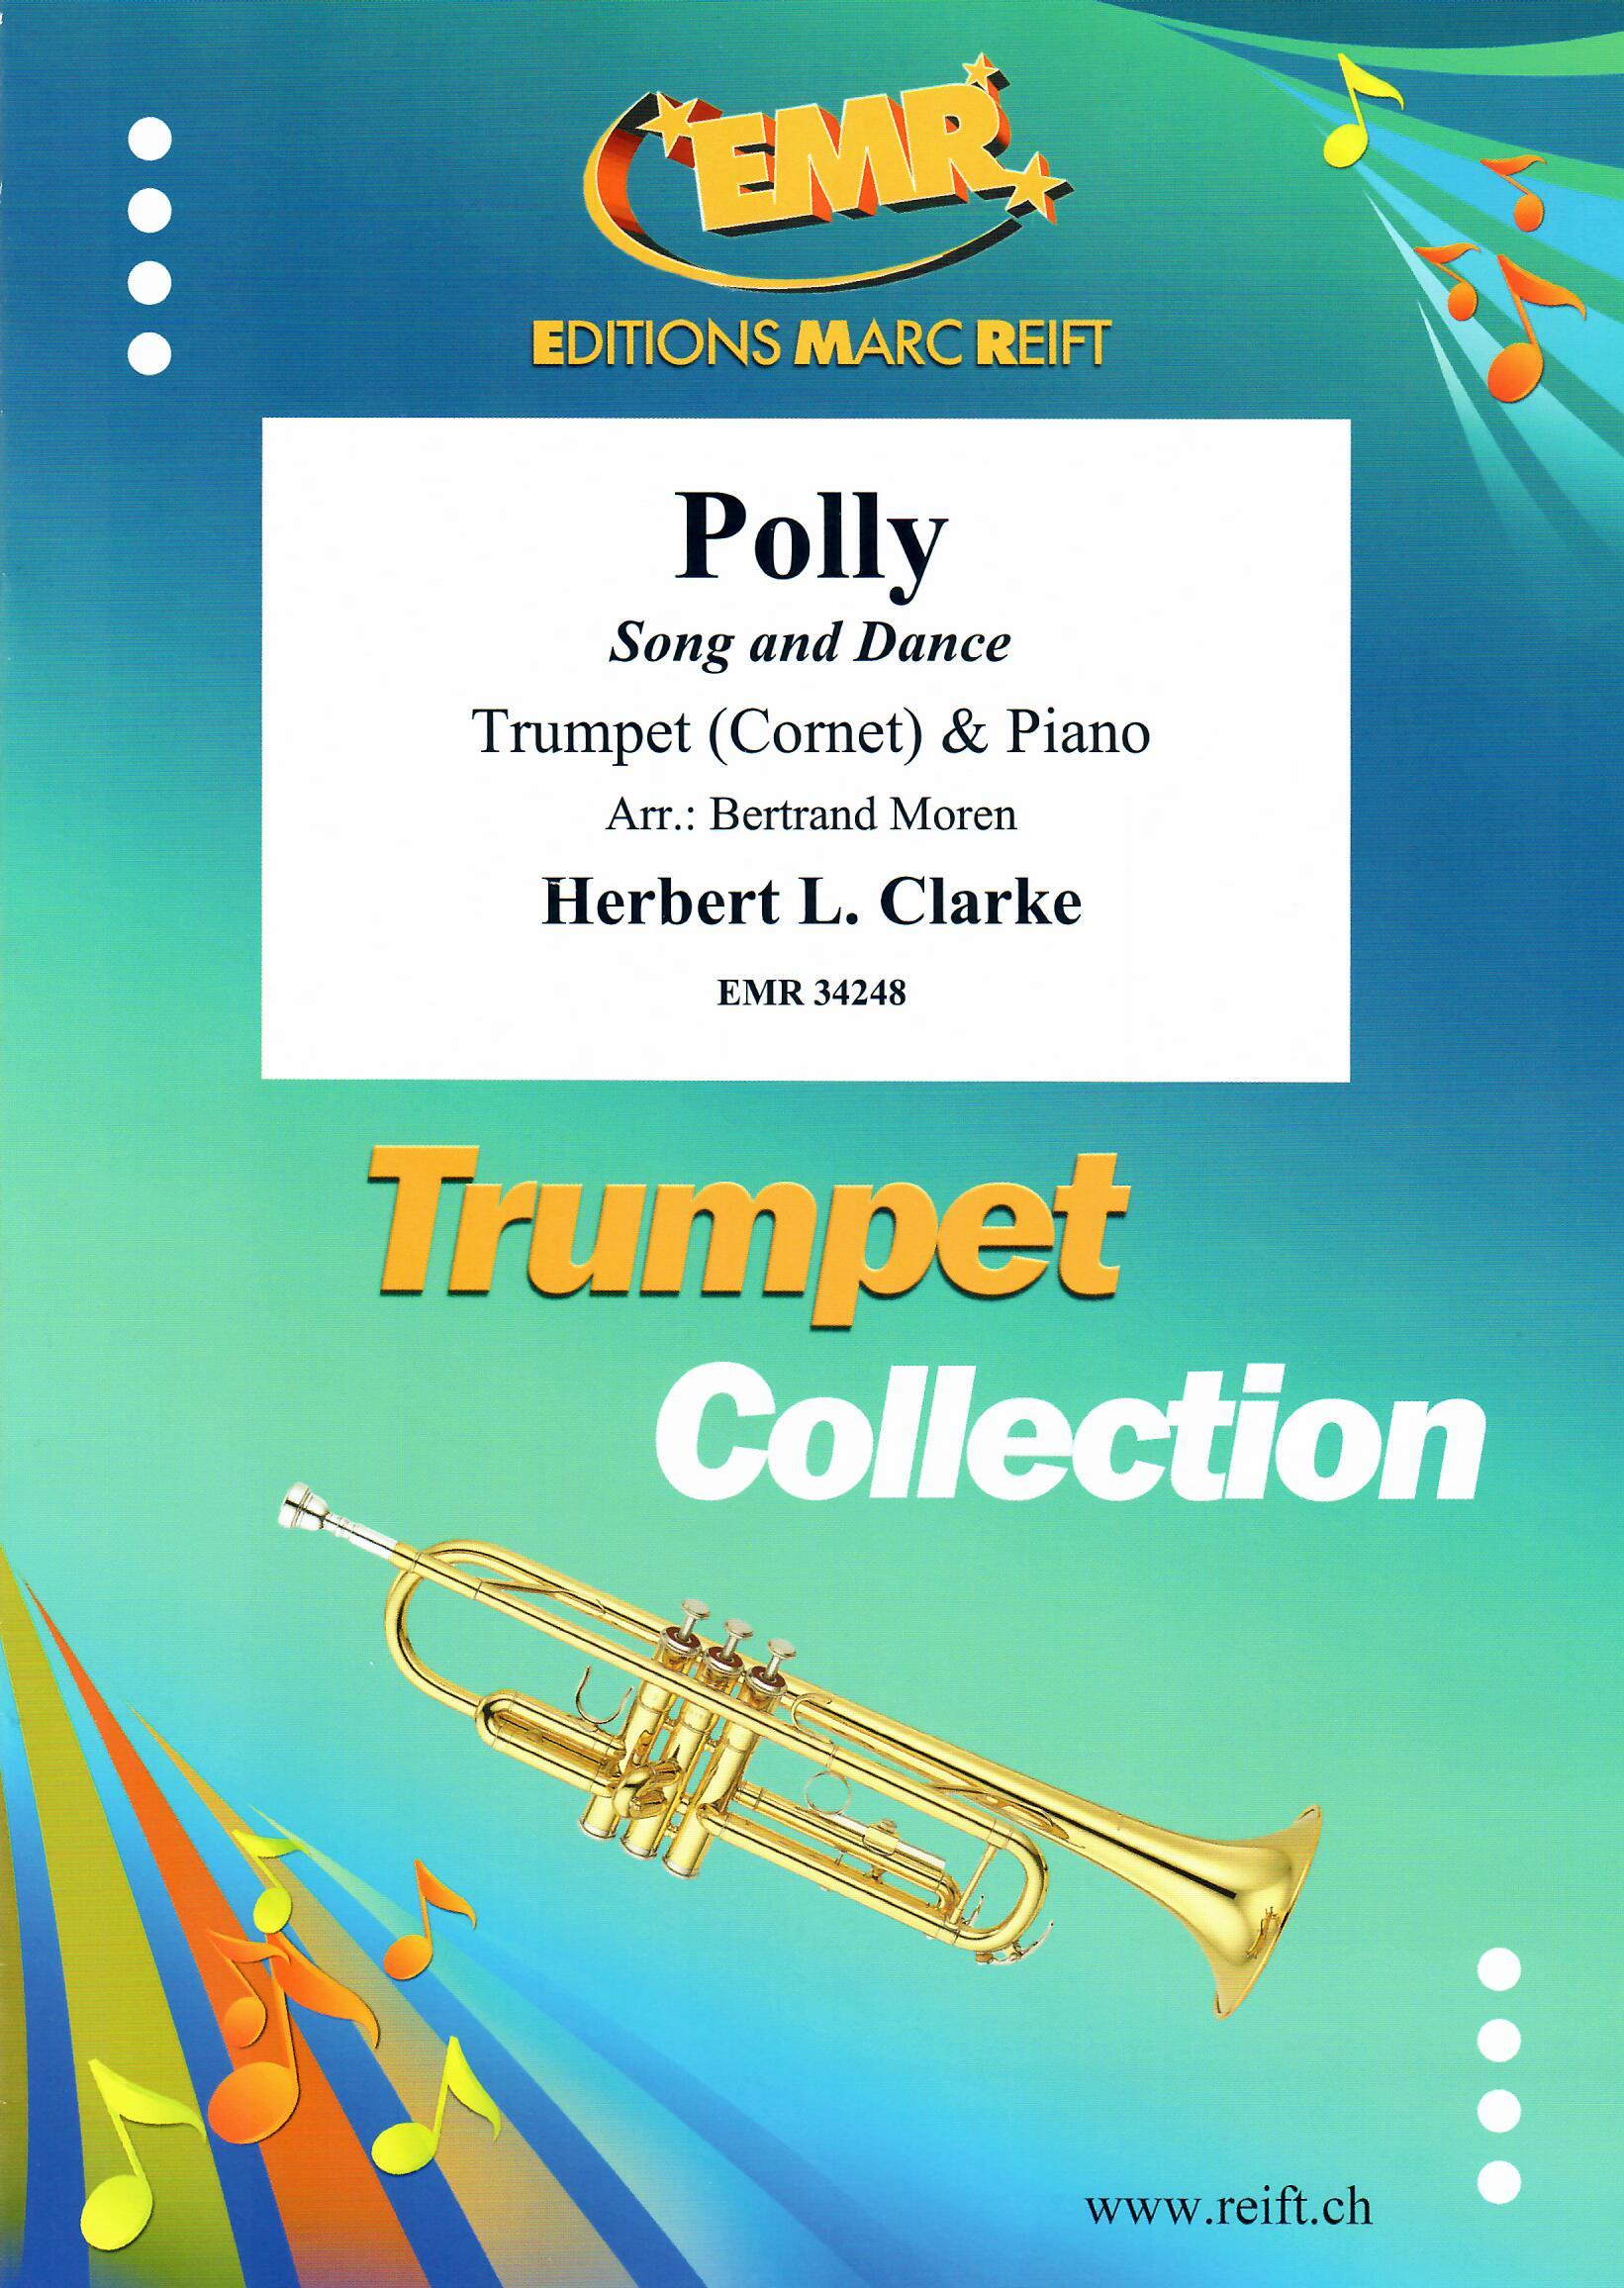 POLLY, SOLOS - B♭. Cornet/Trumpet with Piano